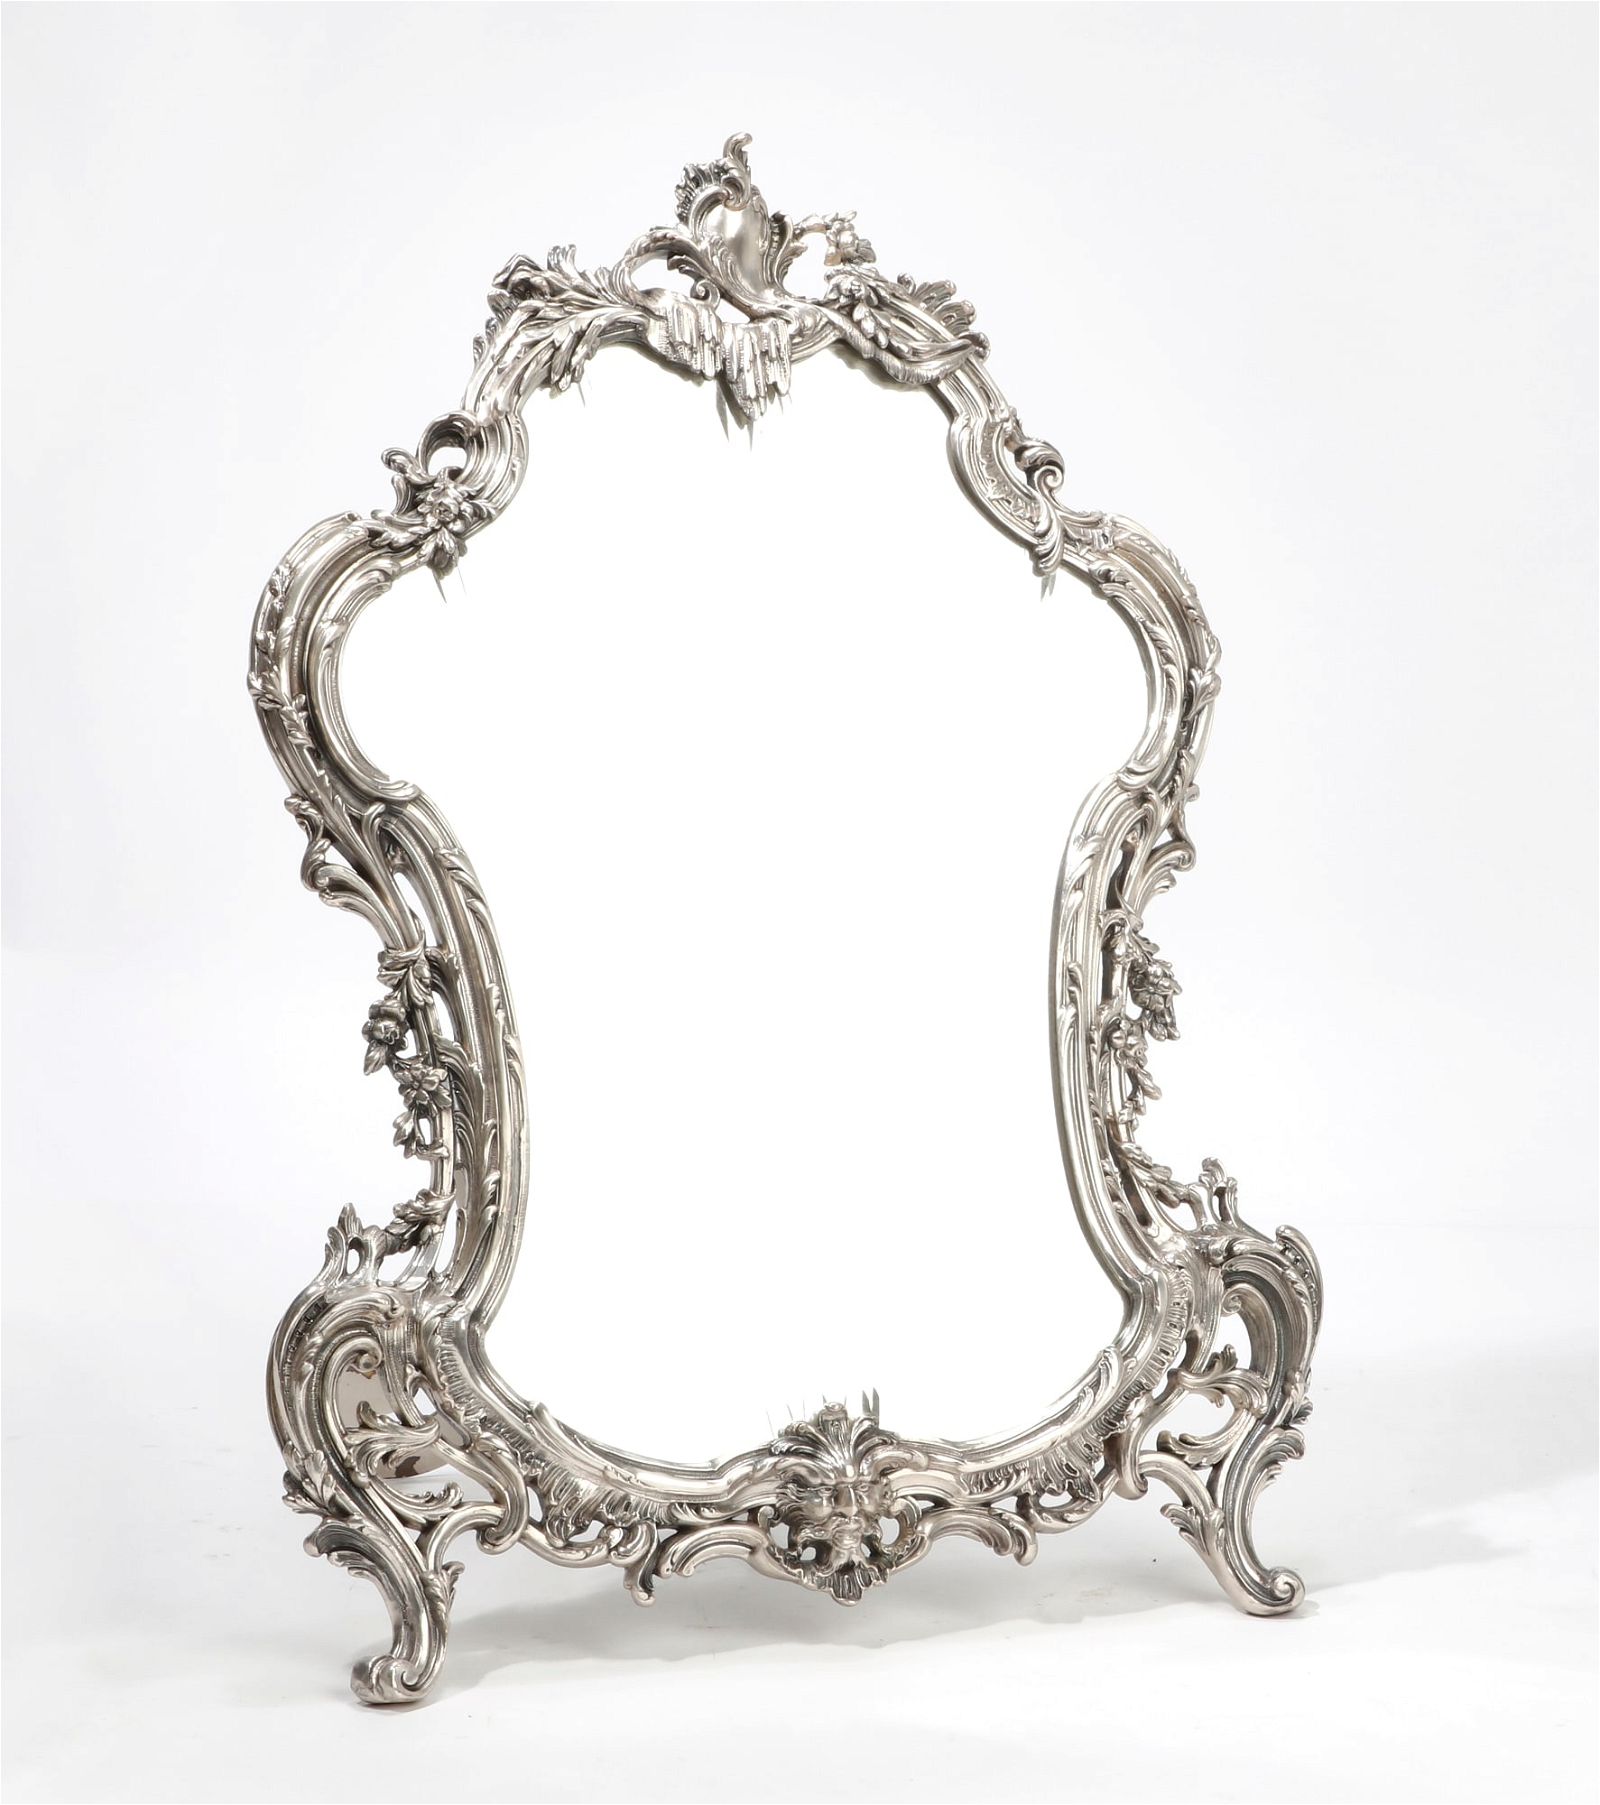 A ROCOCO STYLE SILVER METAL TABLE